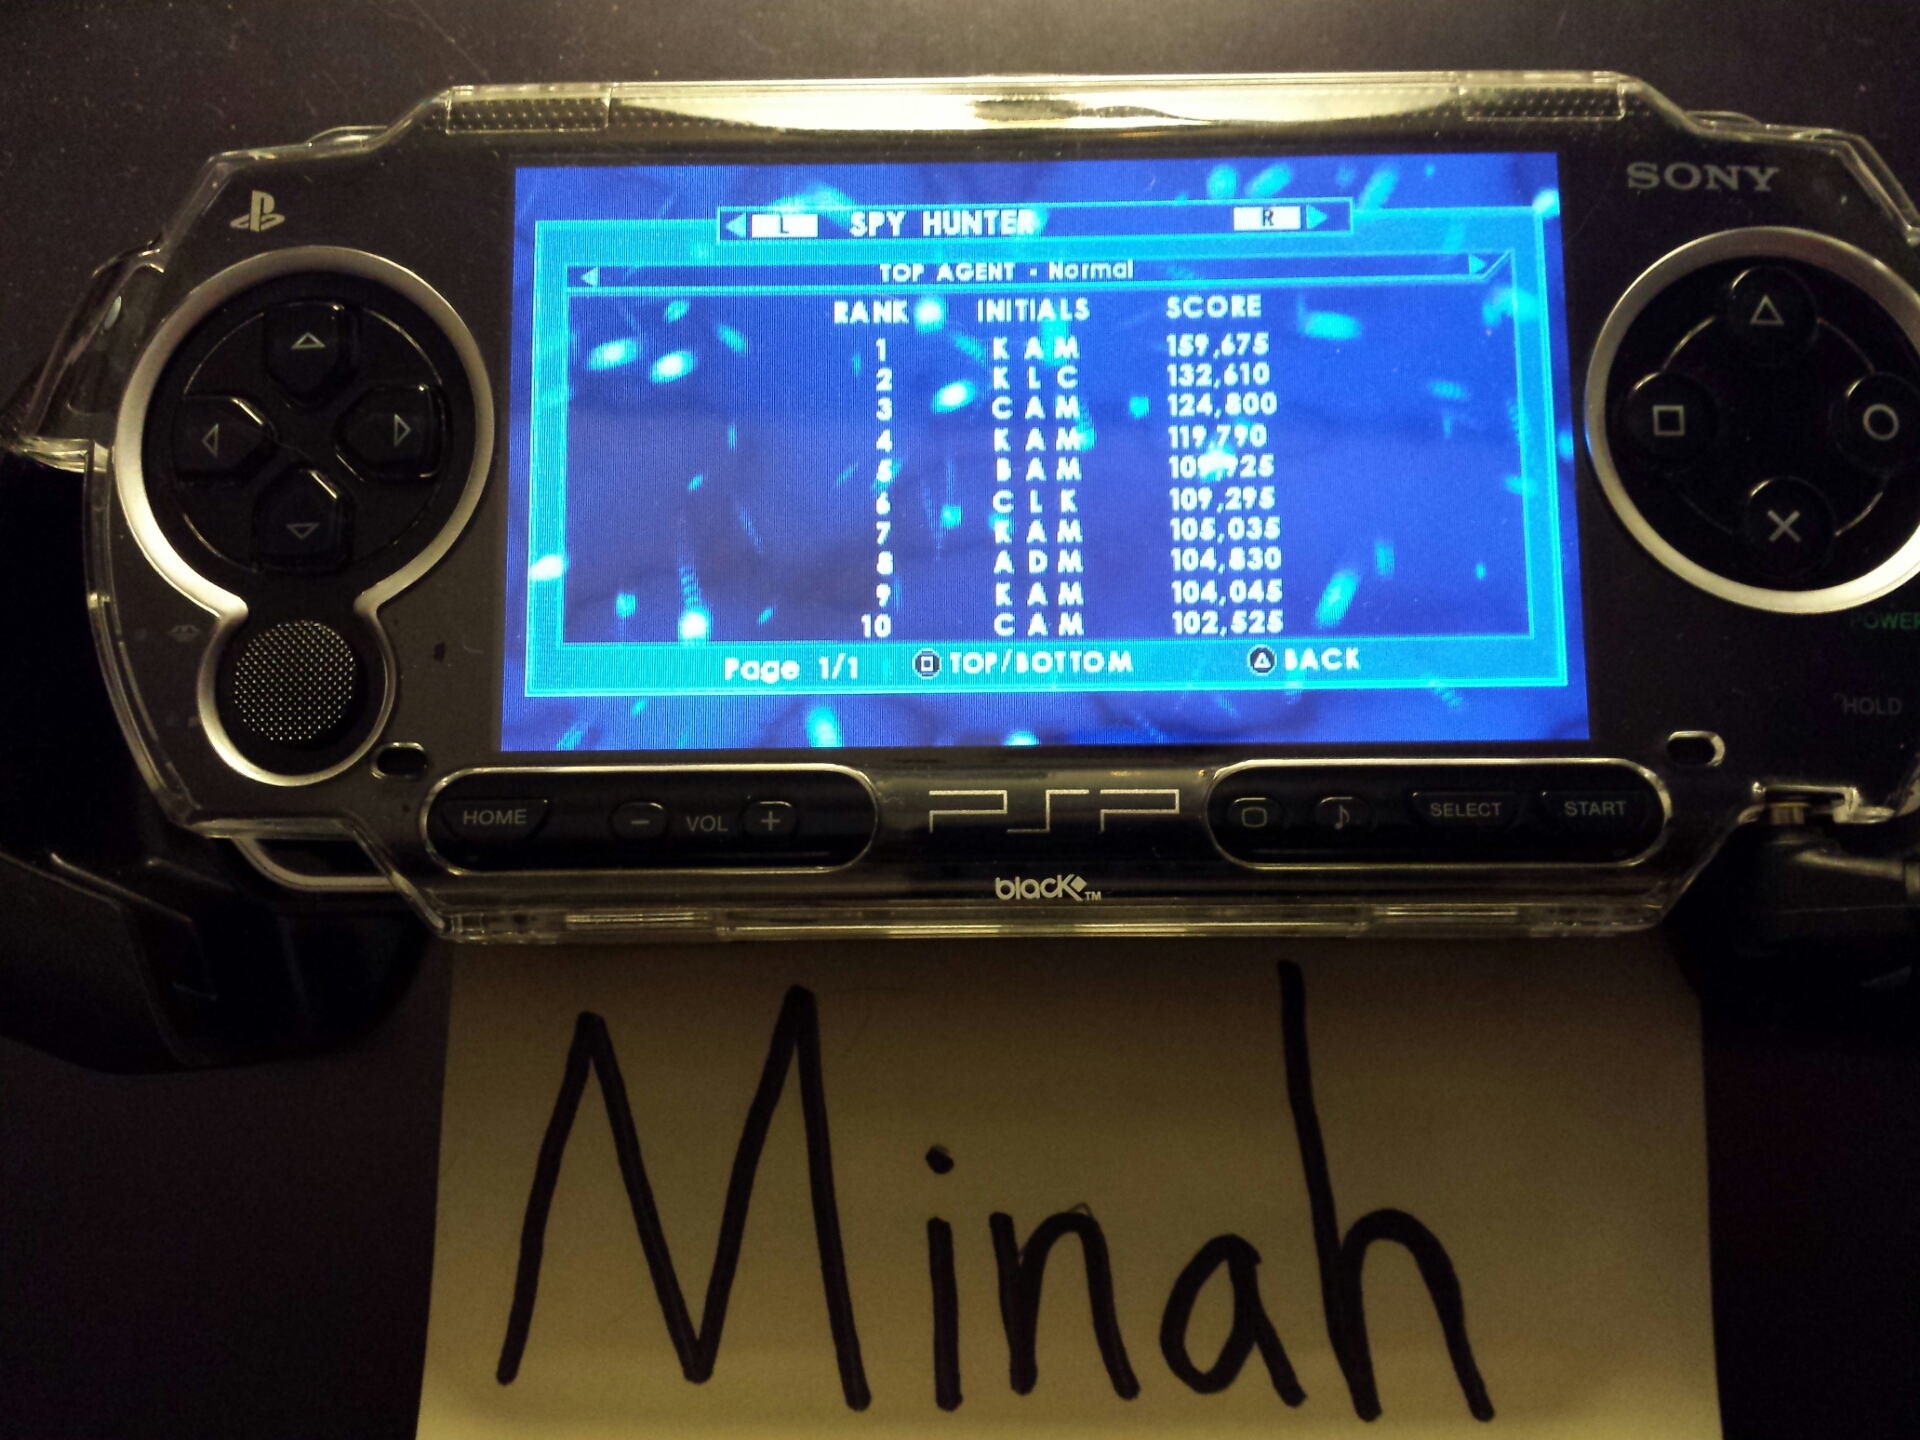 minah: Midway Arcade Treasures: Extended Play: Spy Hunter (PSP) 159,675 points on 2014-10-04 21:21:43